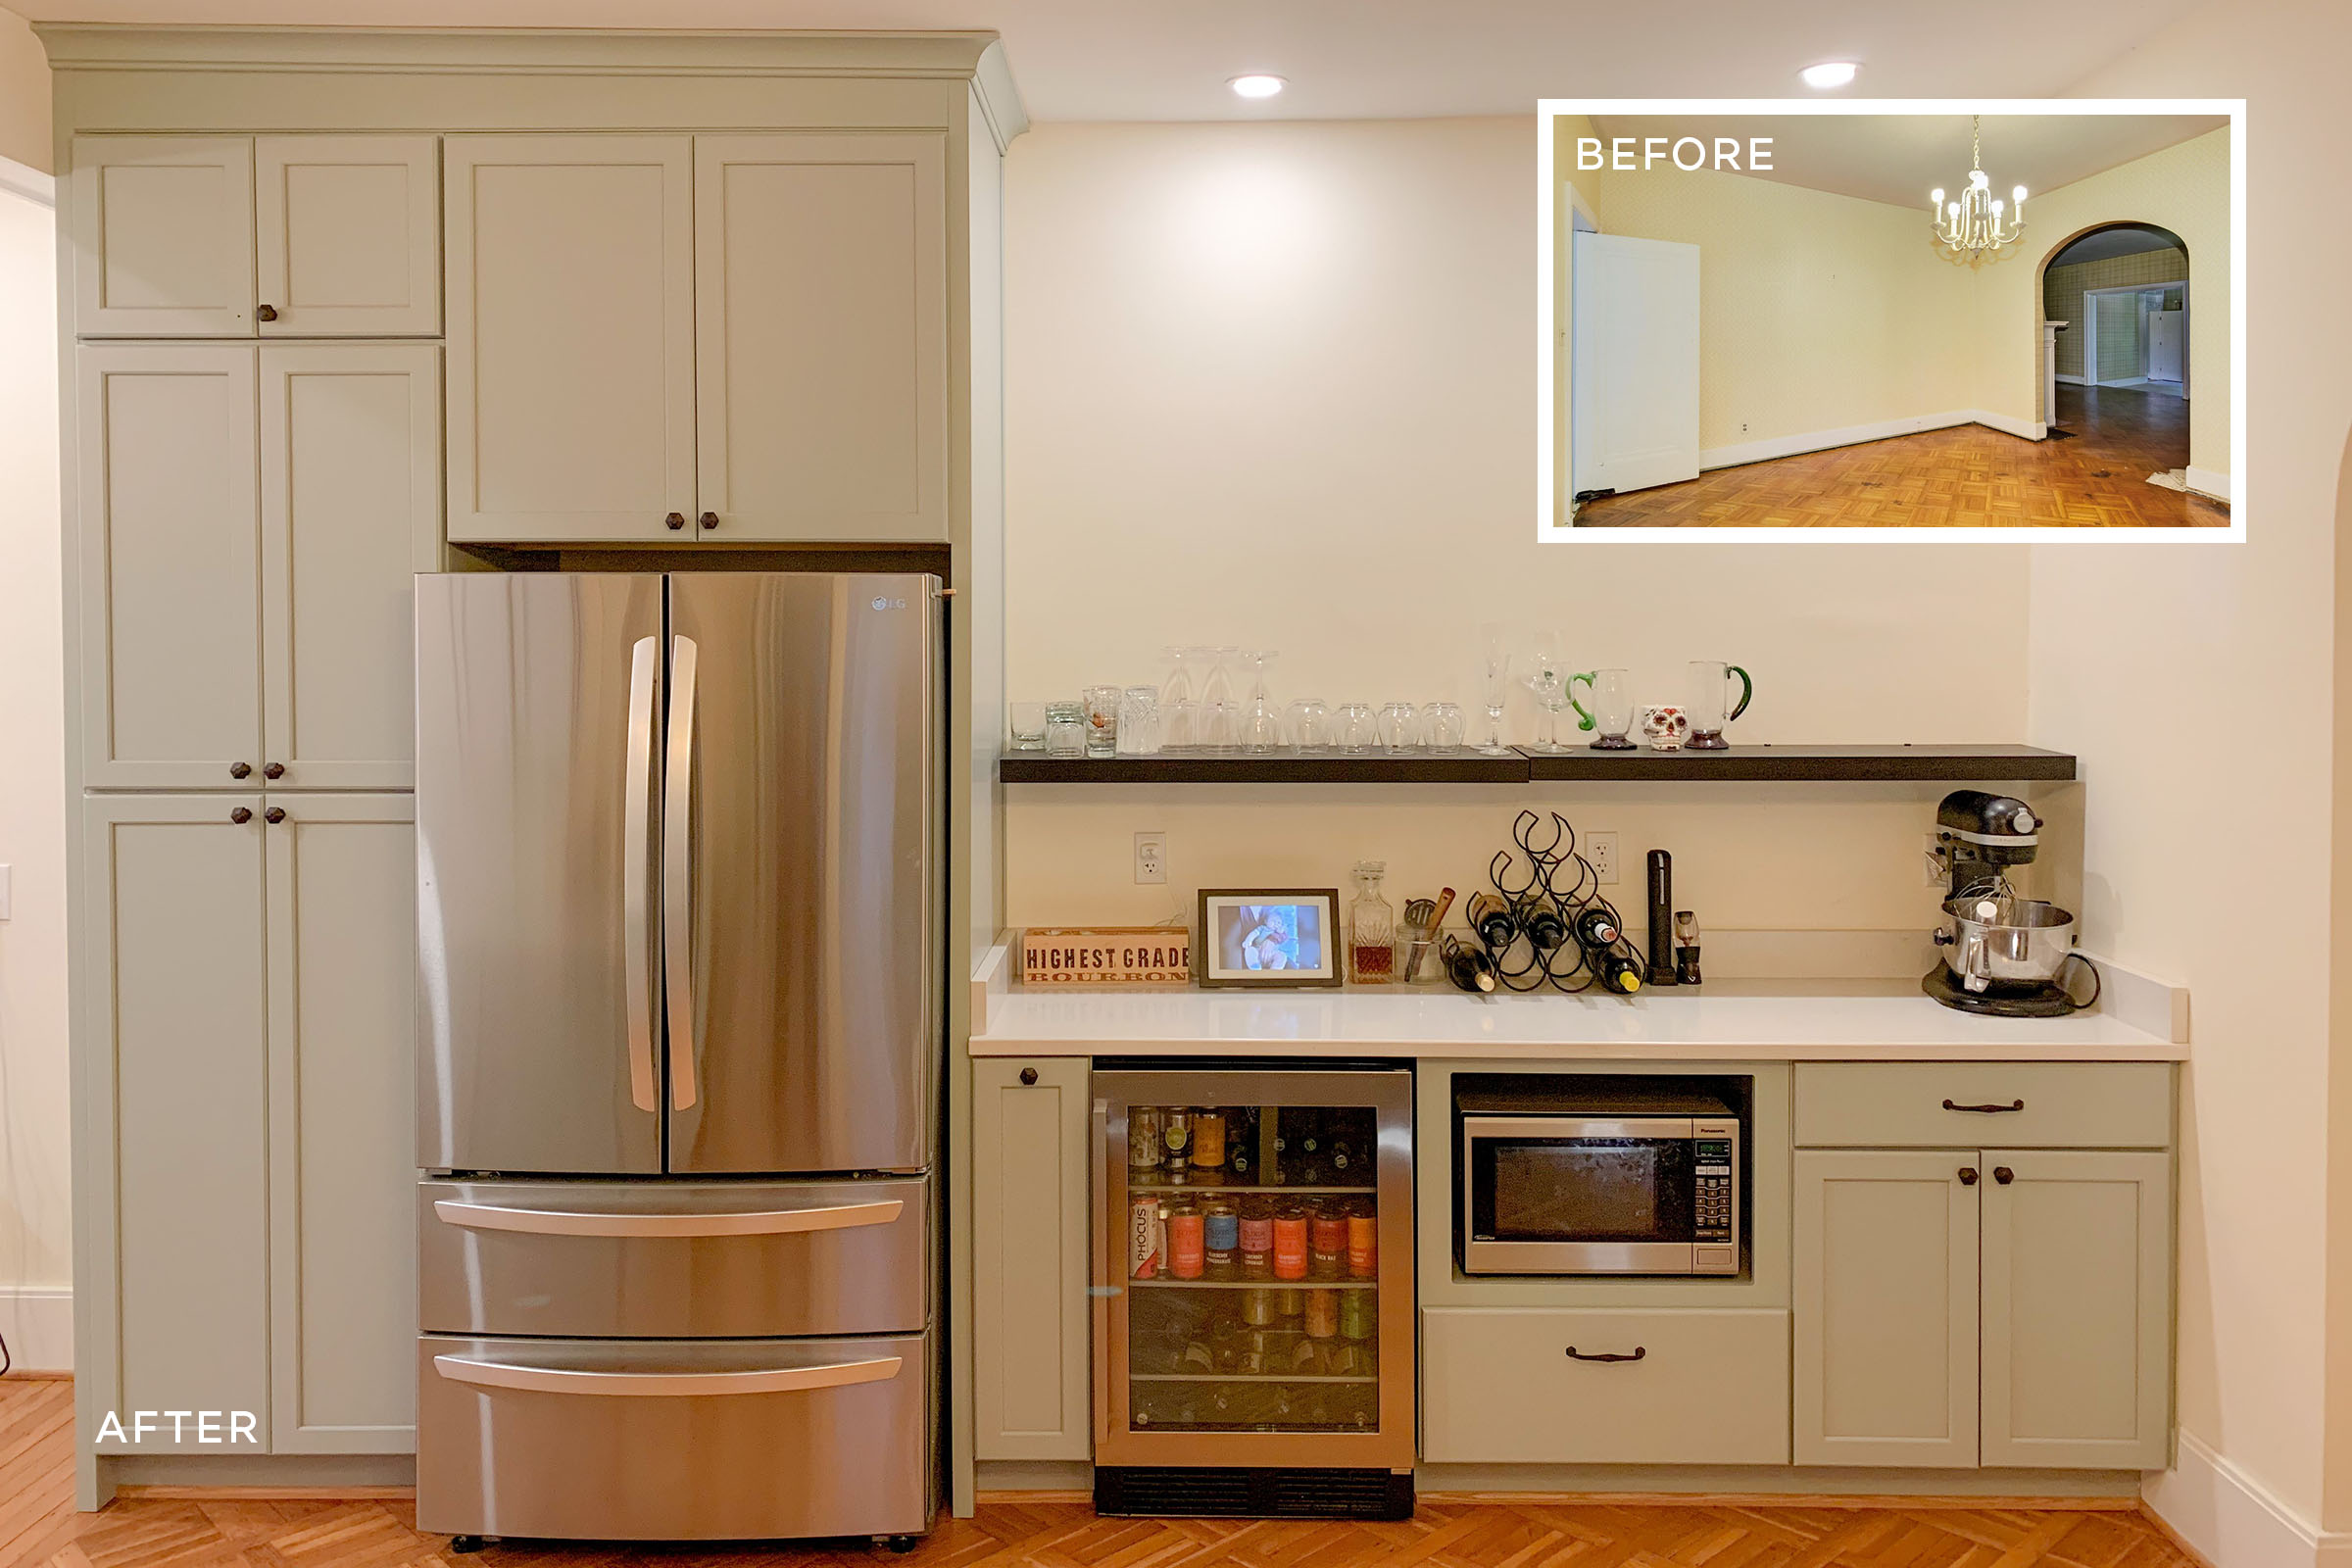 KraftMaid kitchen renovation and expansion featuring pantry storage and a beverage center.